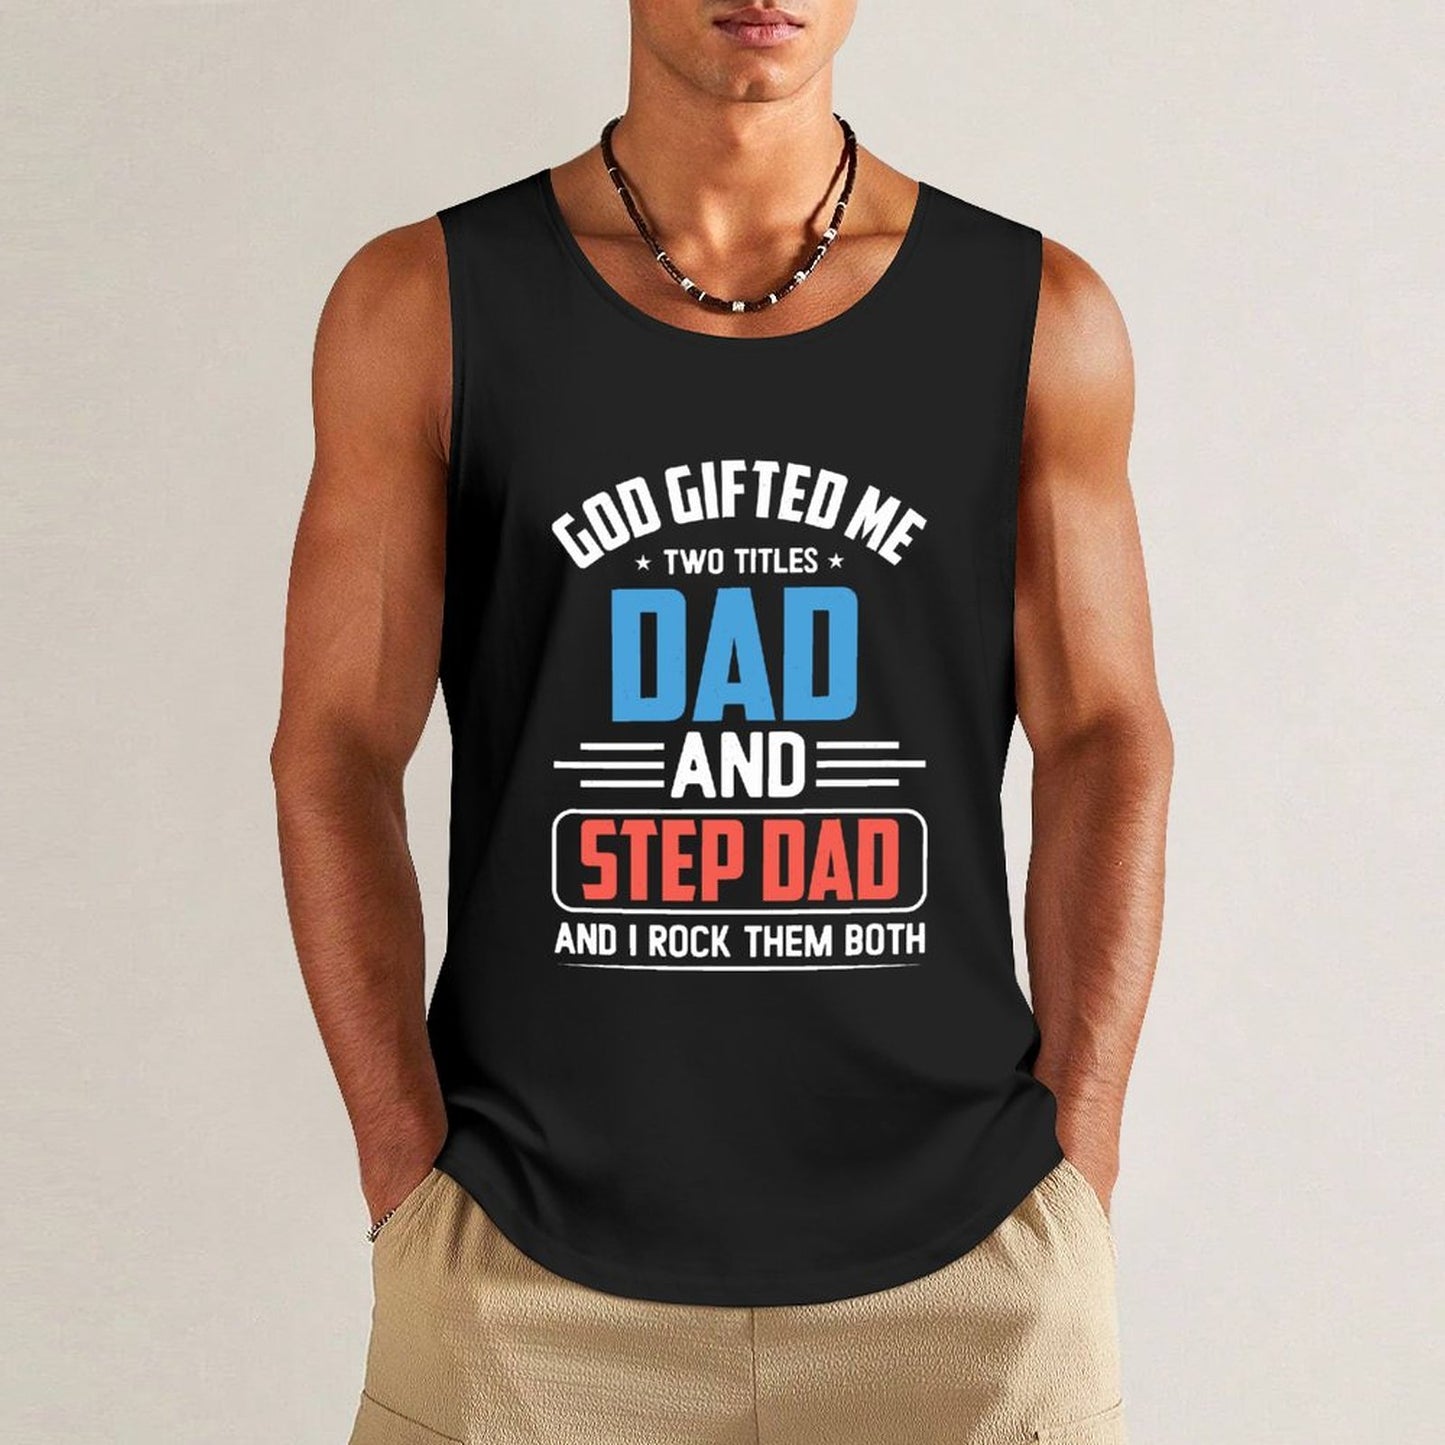 God Gifted Me Two Titles Dad And Step Dad And I Rock Them Both Men's Christian Tank Top SALE-Personal Design